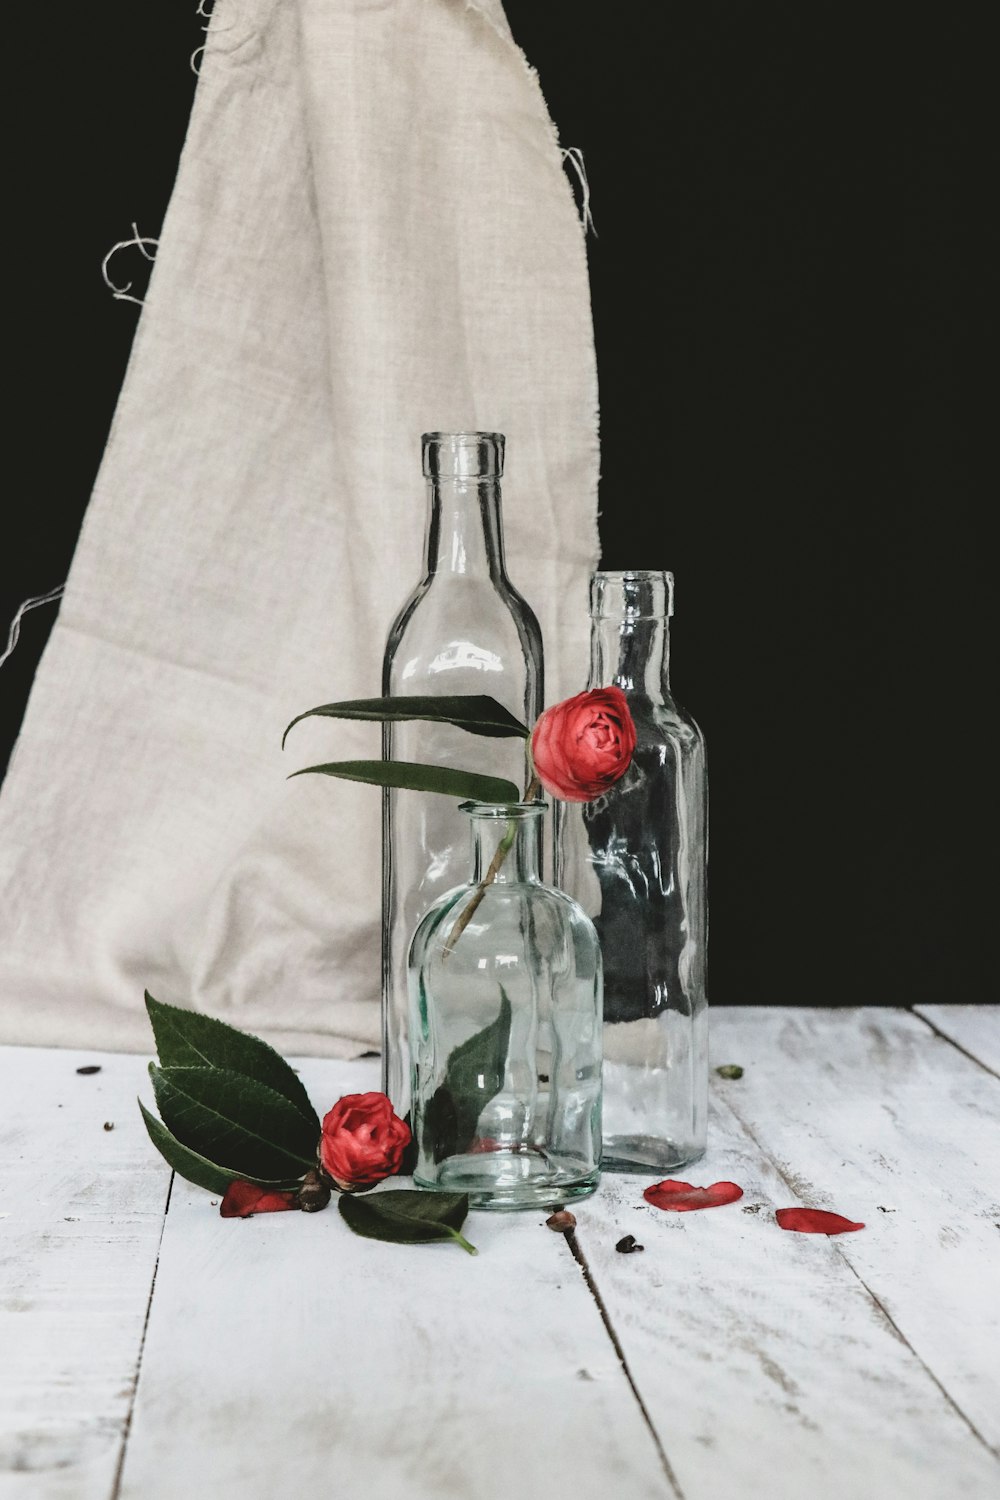 clear glass bottle with red liquid